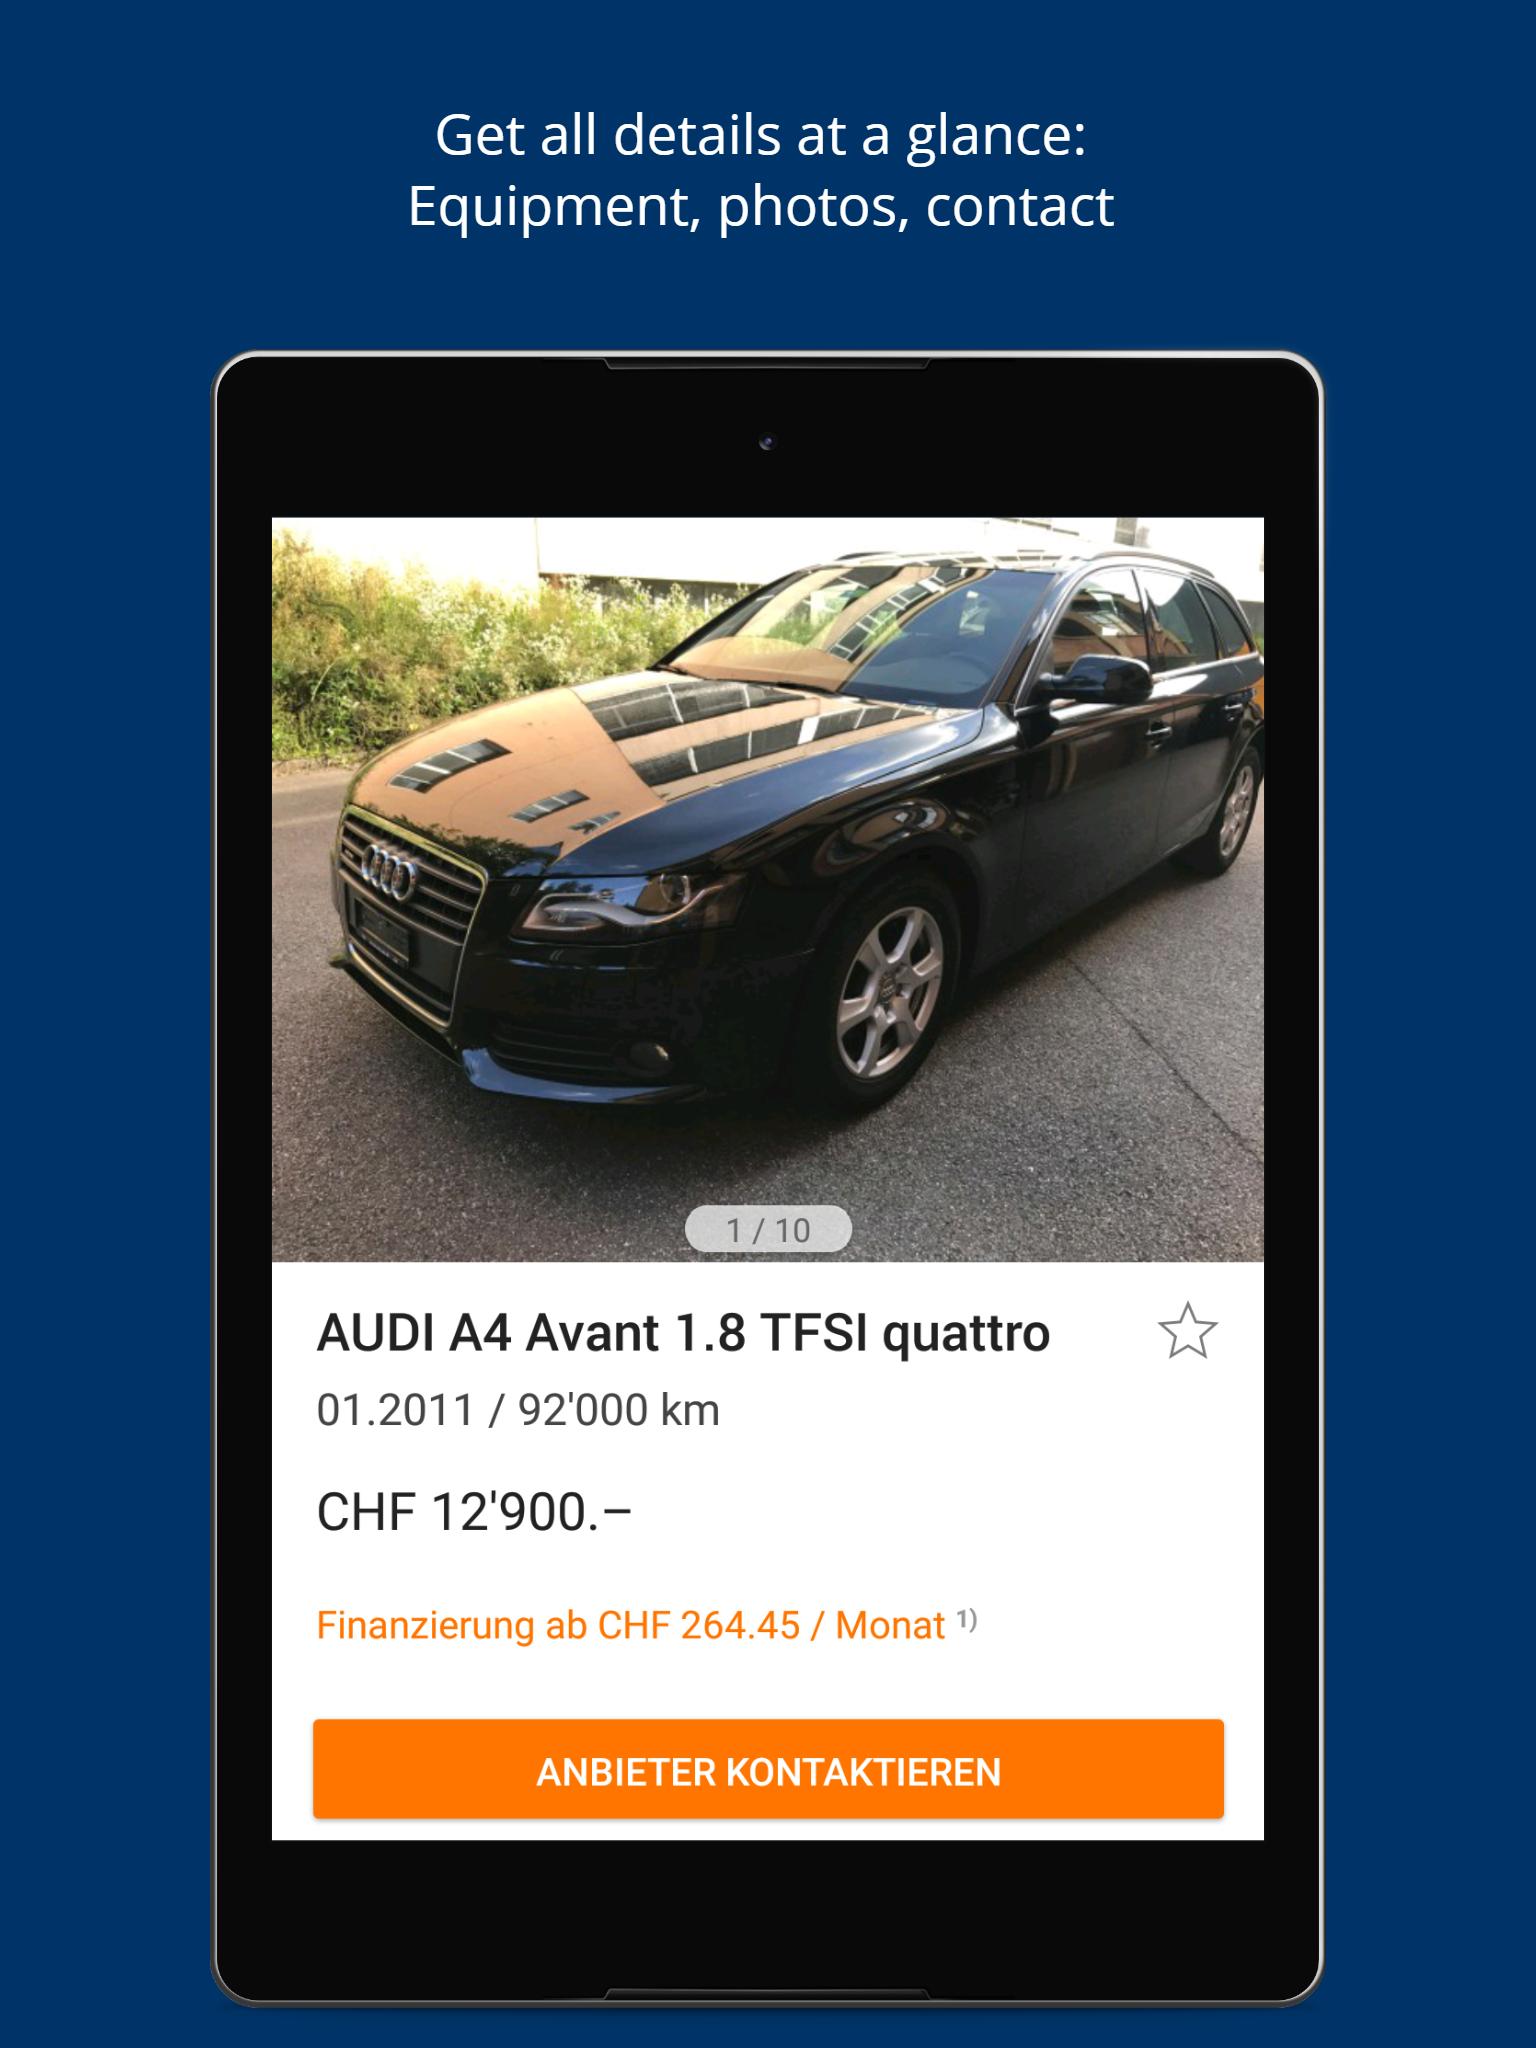 AutoScout24 Switzerland – Find your new car 4.0.0 Screenshot 11